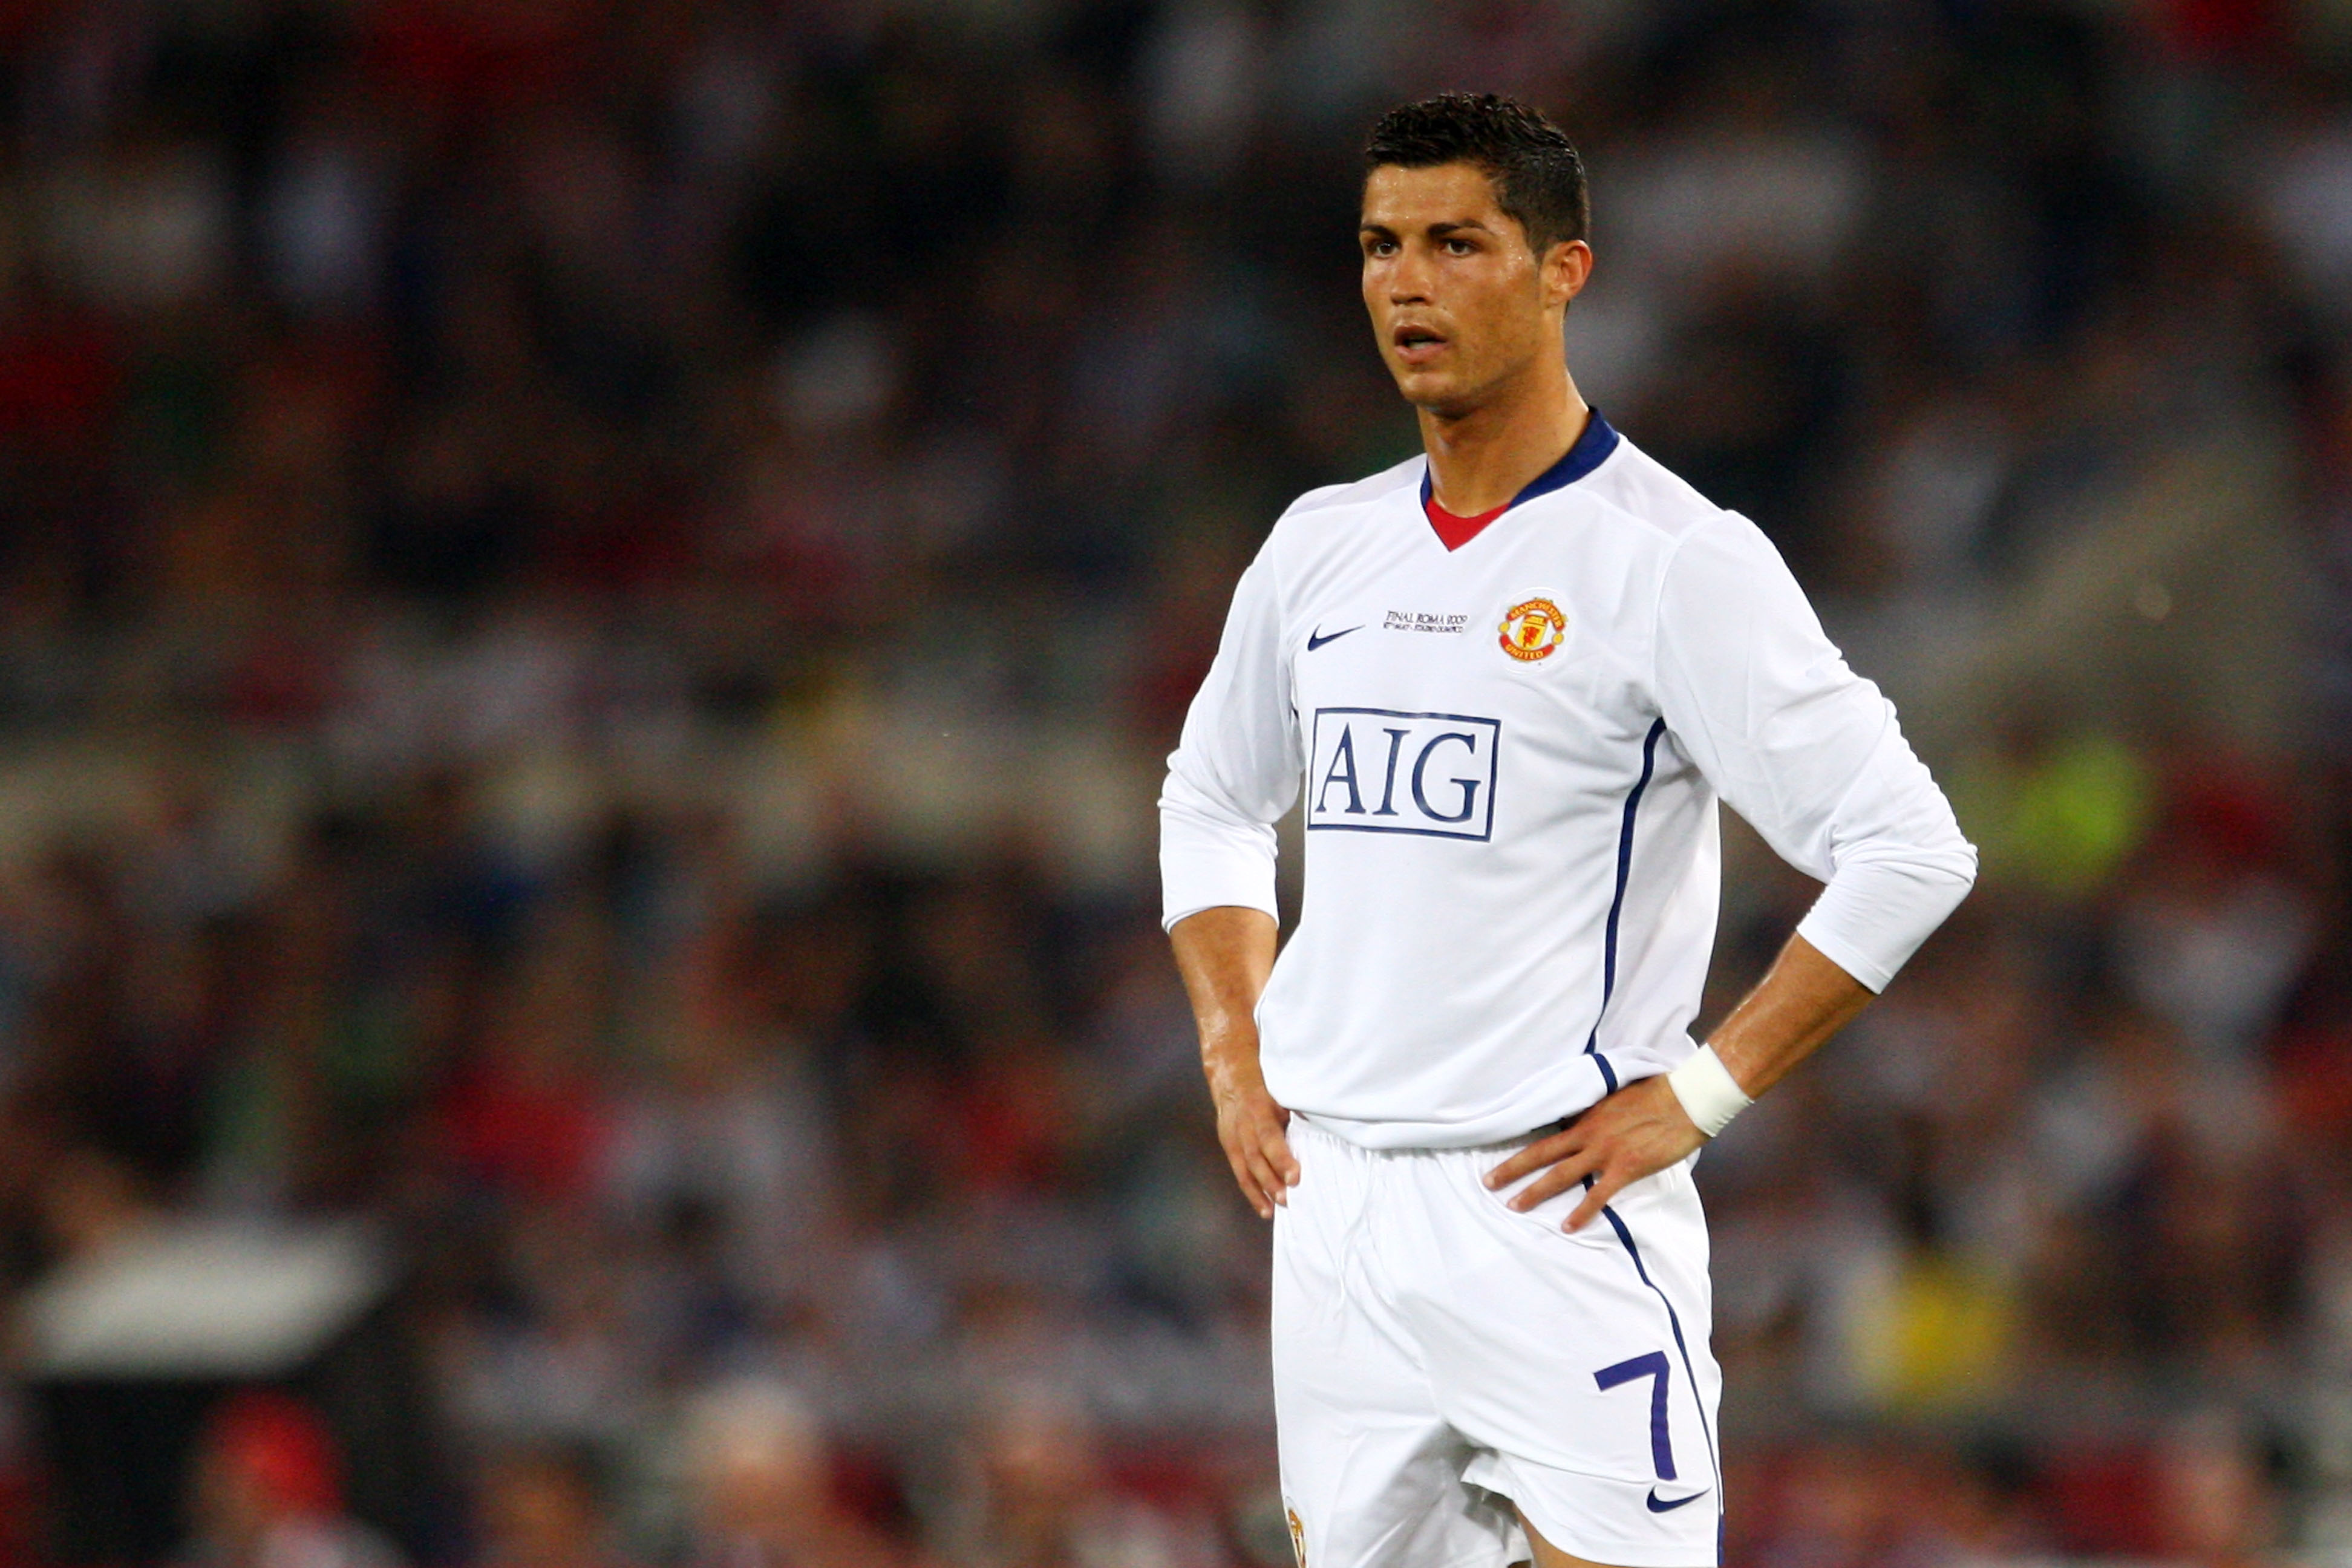 ROME - MAY 27:  Cristiano Ronaldo of Manchester United looks on during the UEFA Champions League Final match between Barcelona and Manchester United at the Stadio Olimpico on May 27, 2009 in Rome, Italy.  (Photo by Laurence Griffiths/Getty Images)